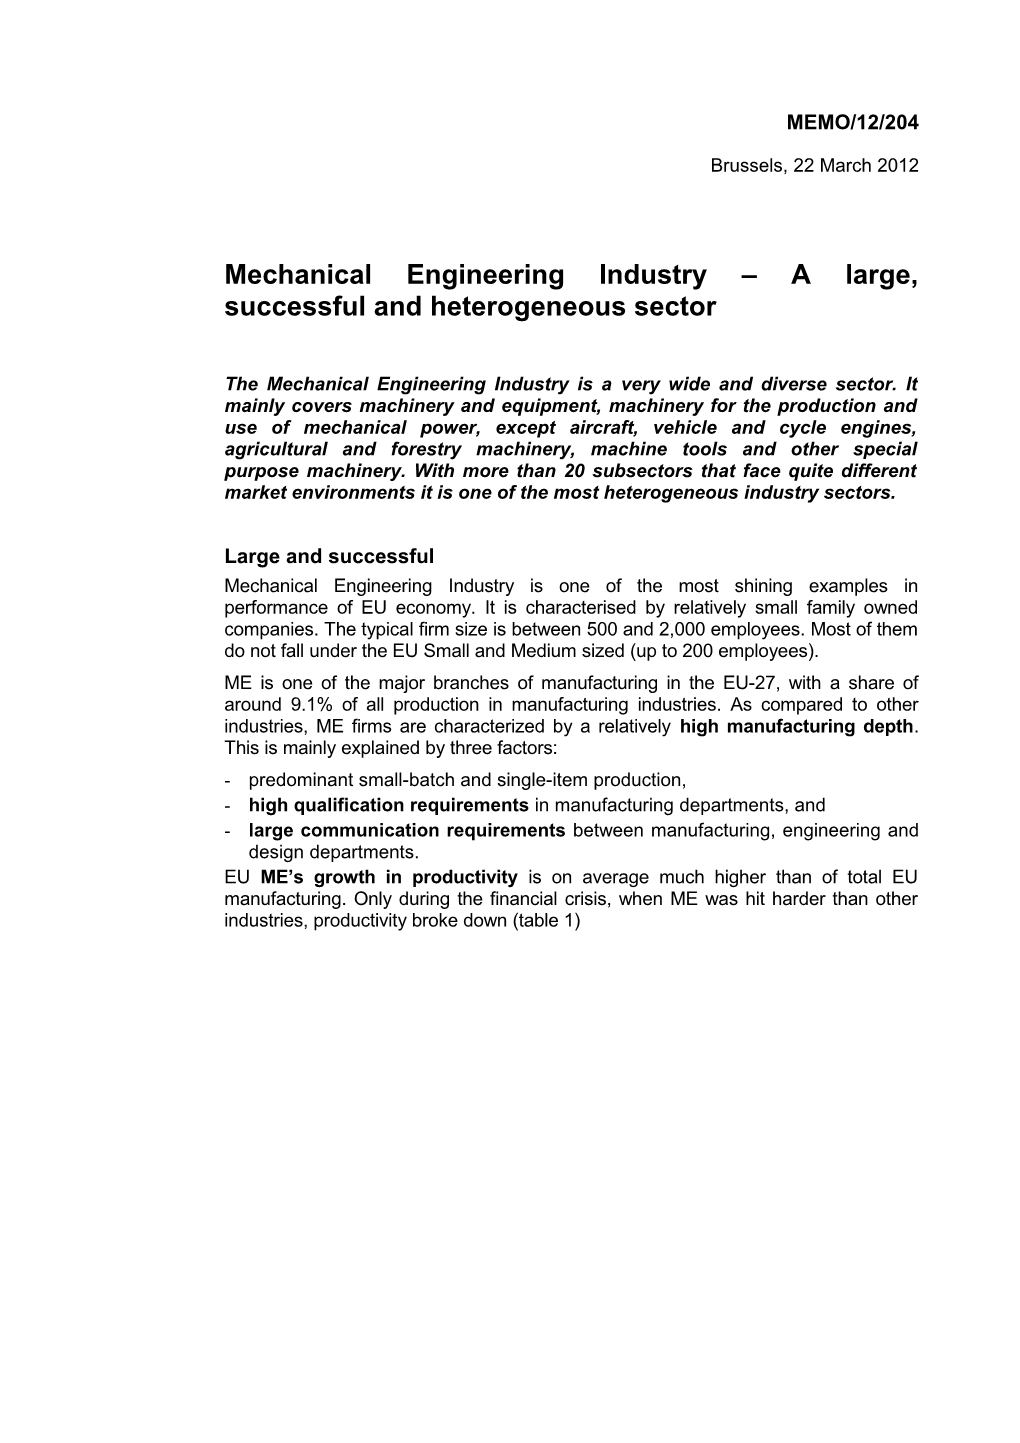 Mechanical Engineering Industry a Large, Successful and Heterogeneous Sector